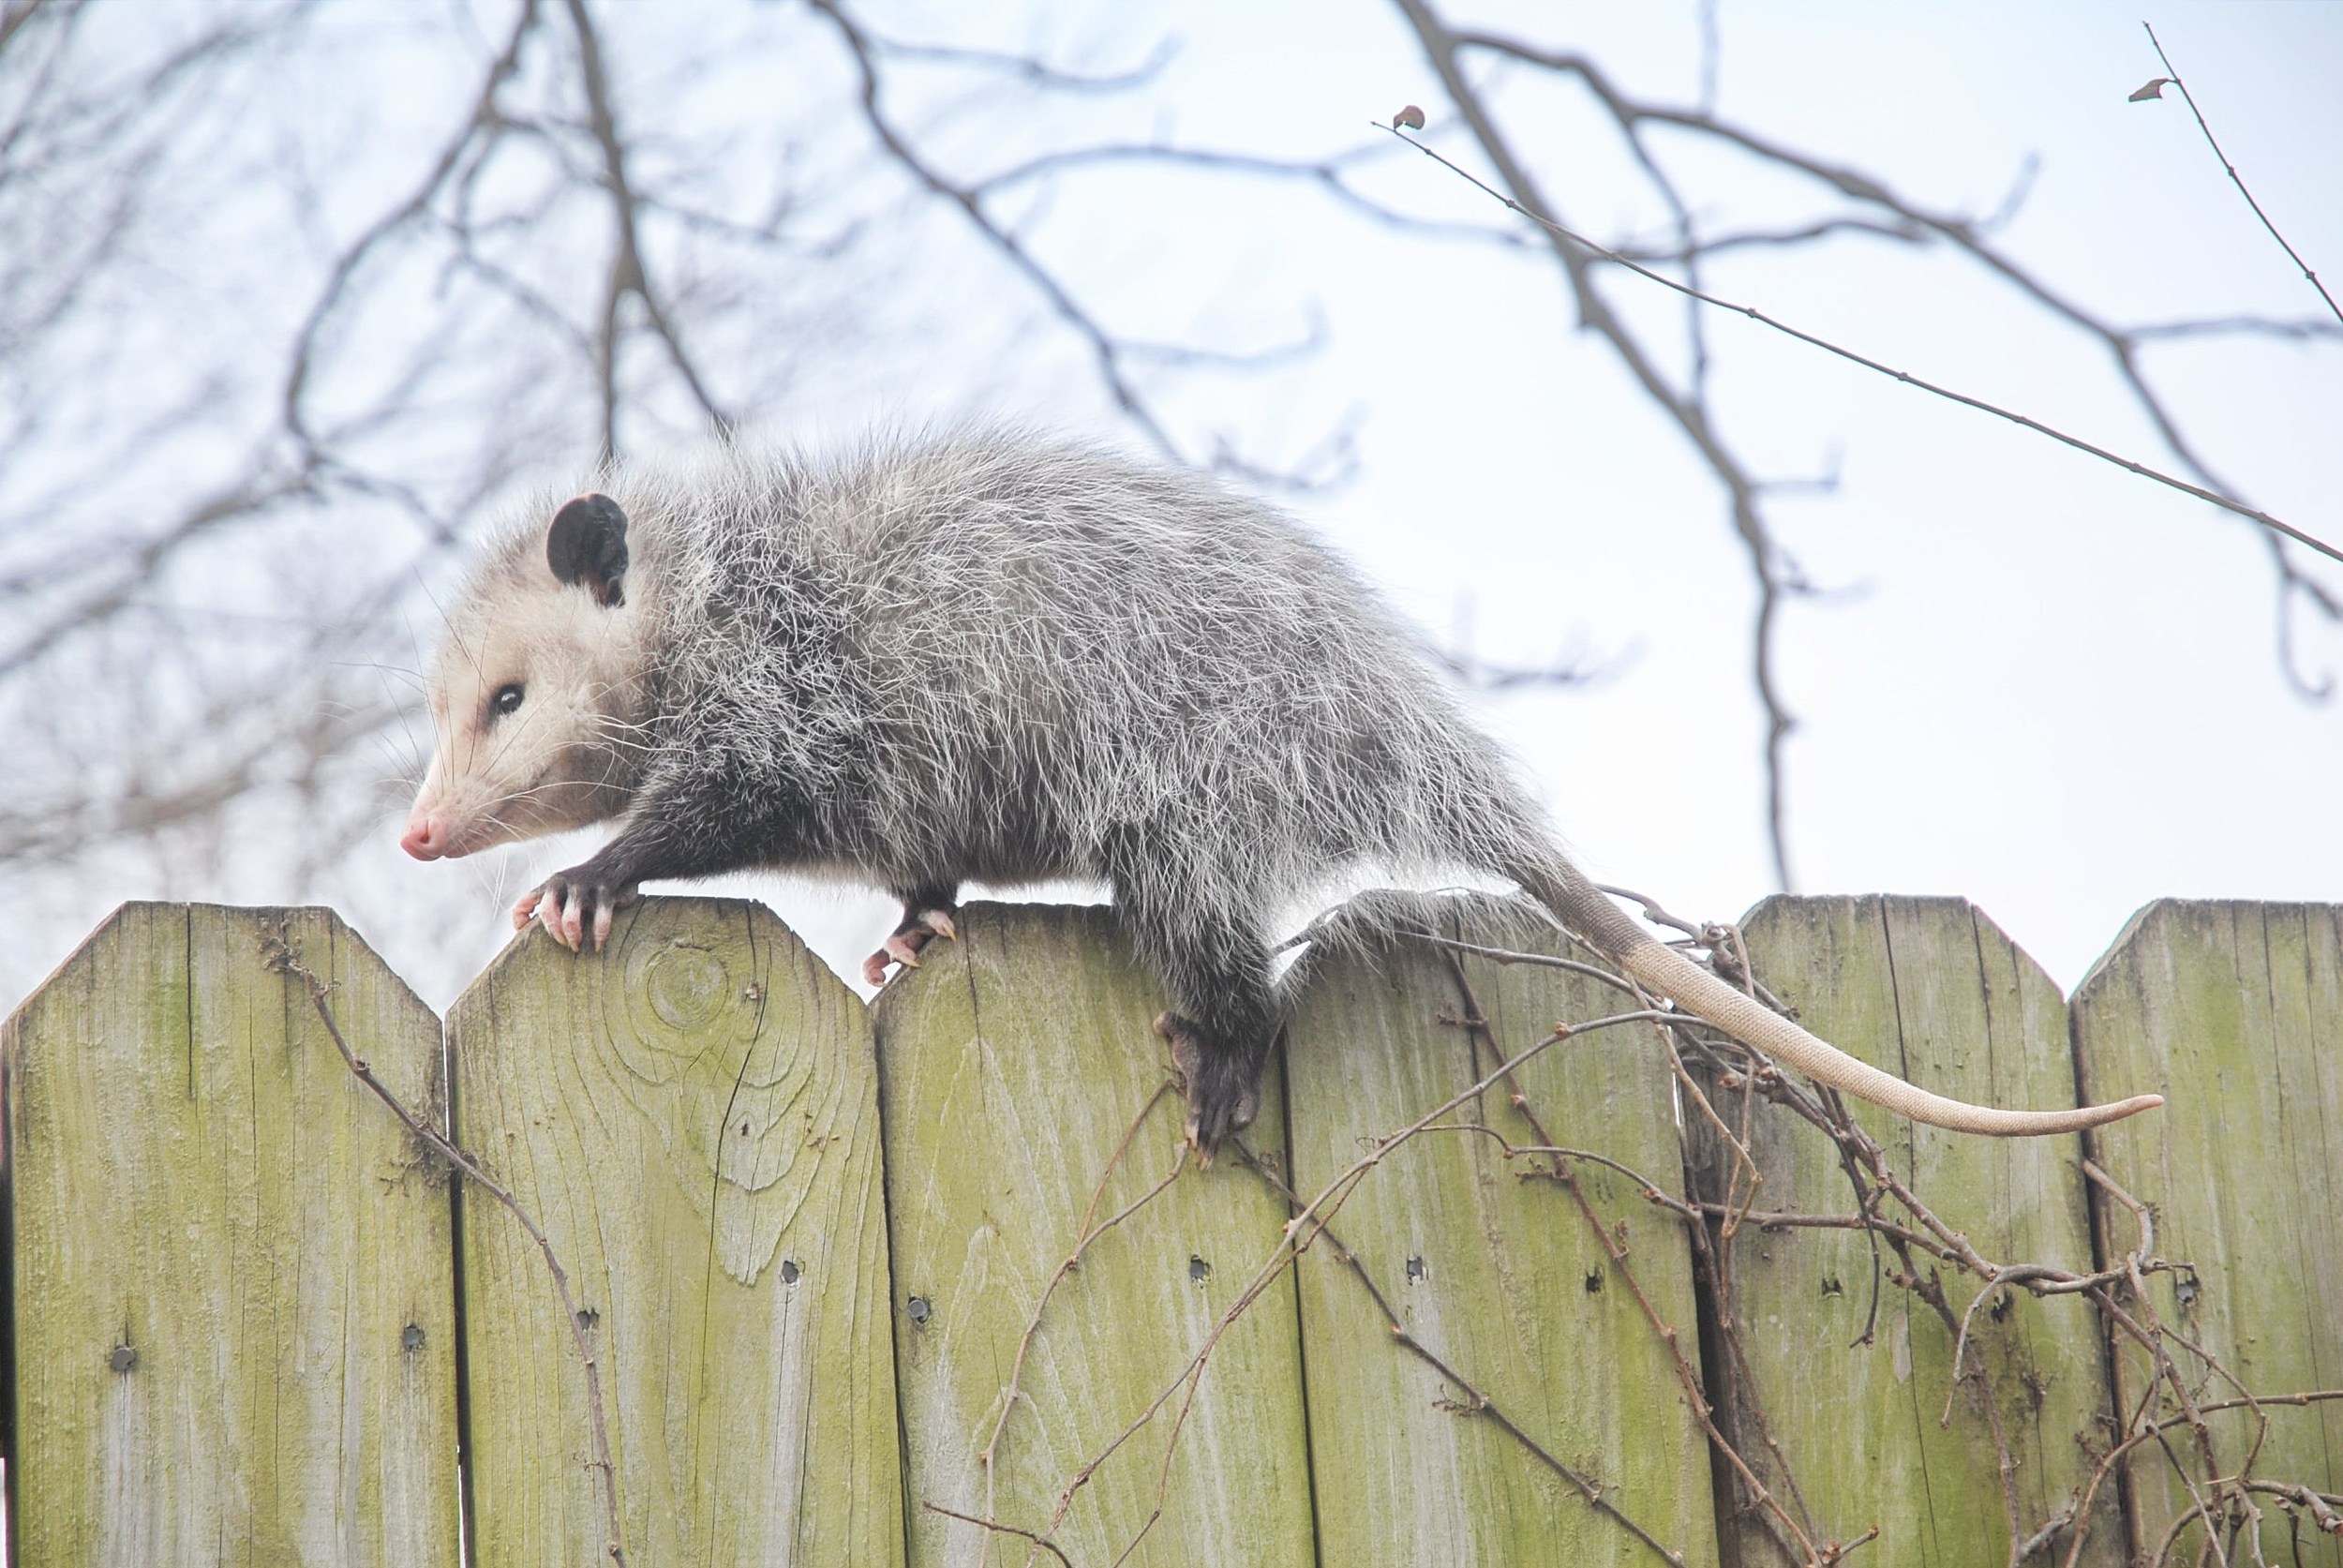 The shy opossum is a superhero in secret (What's in your backyard)